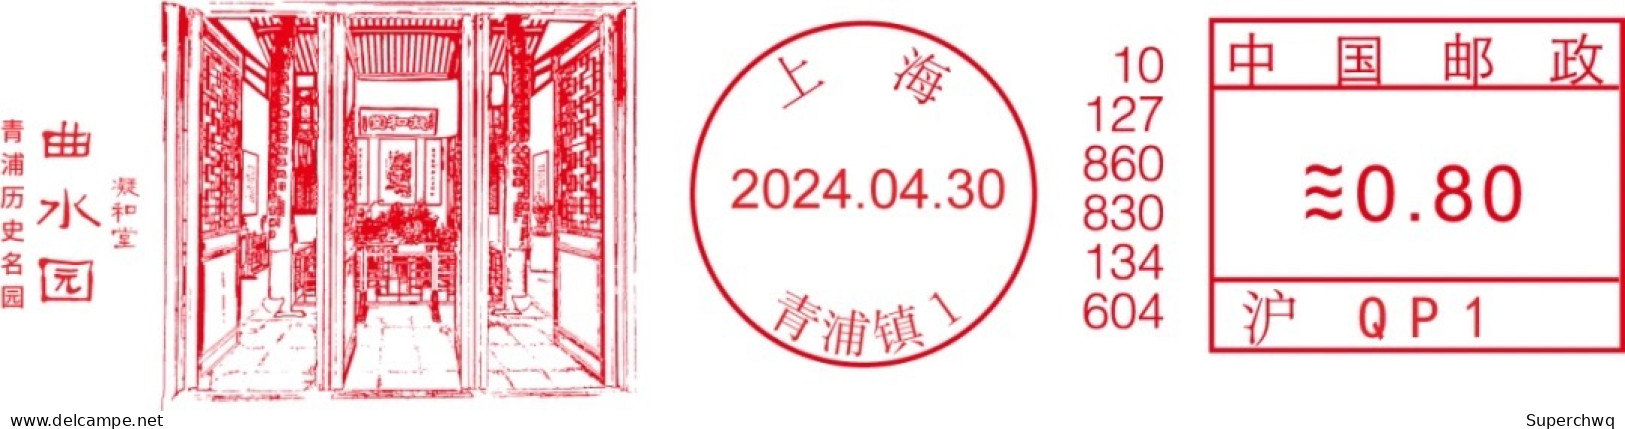 China cover "Qingpu Historical Park - Qushui Park" (Shanghai) Postage Machine Stamped First Day Actual Delivery Seal - Briefe